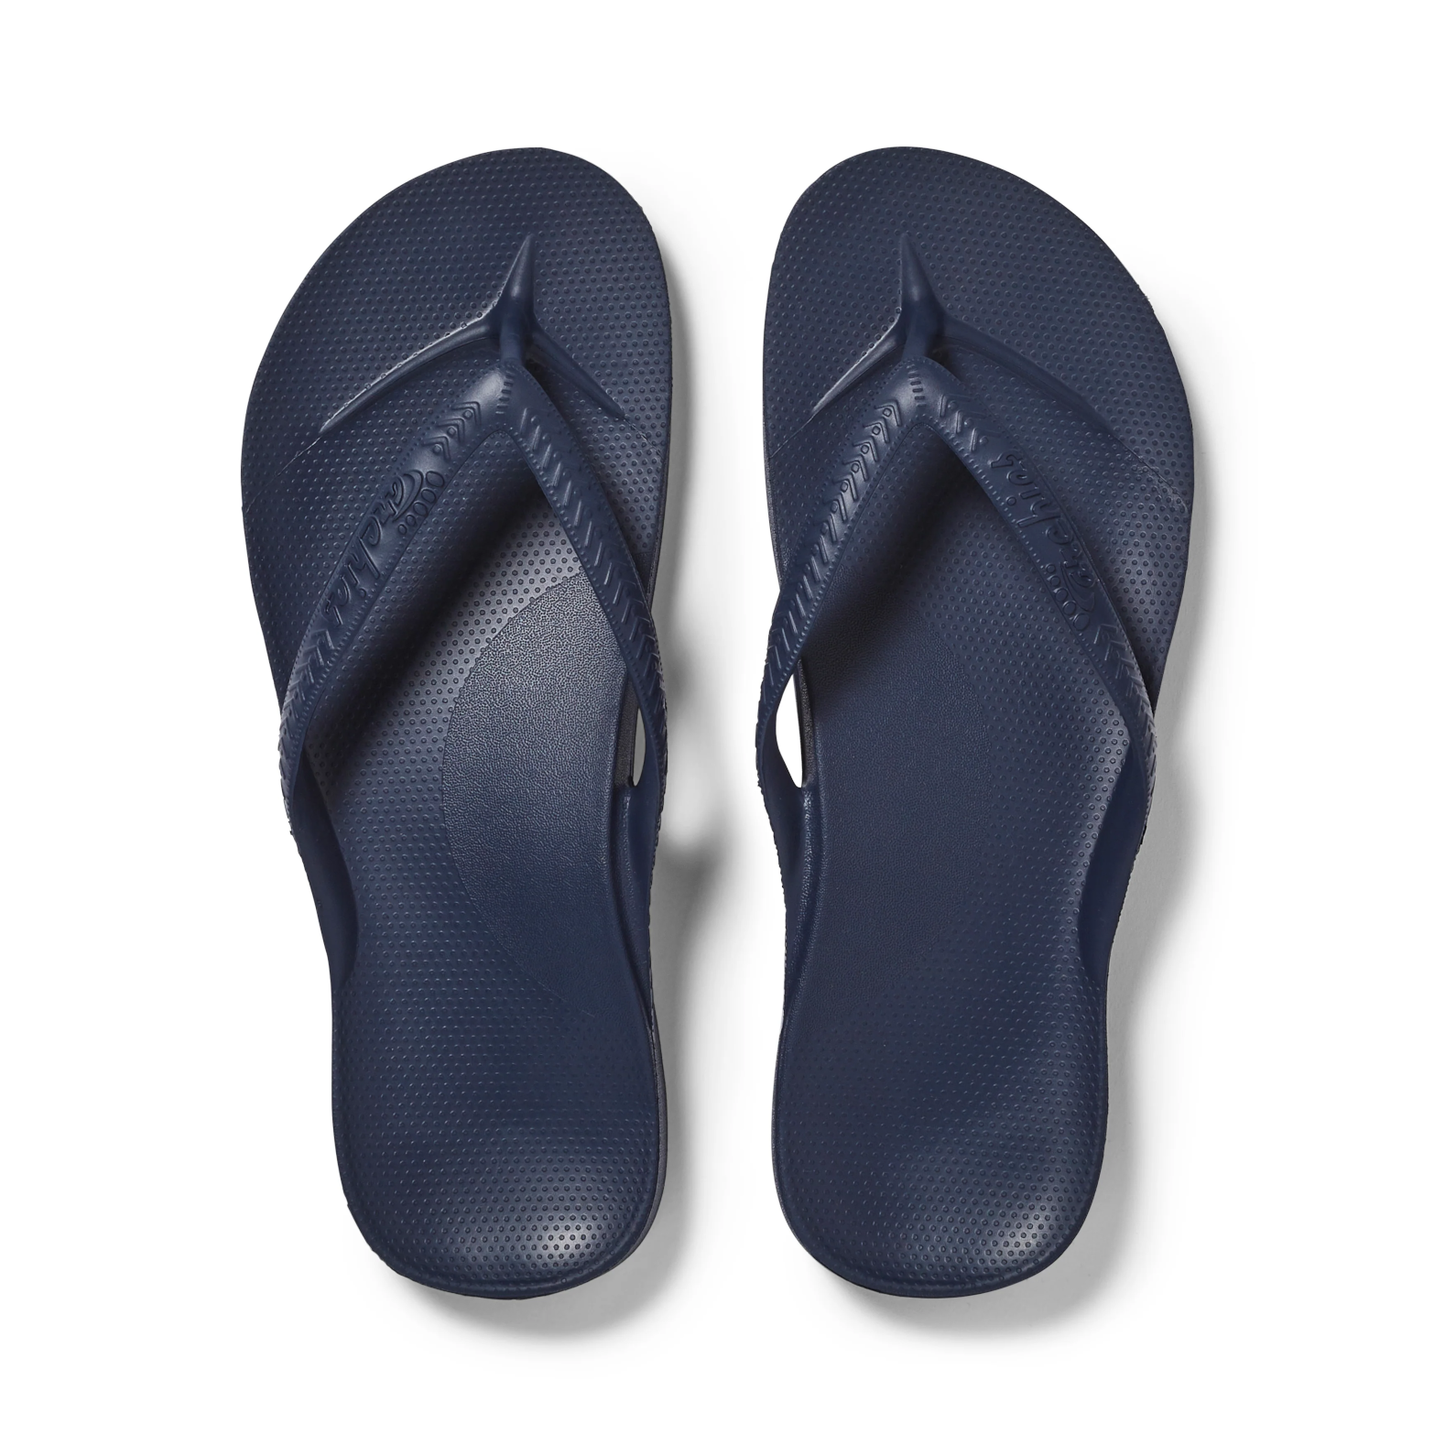 Arch Support Jandals Navy